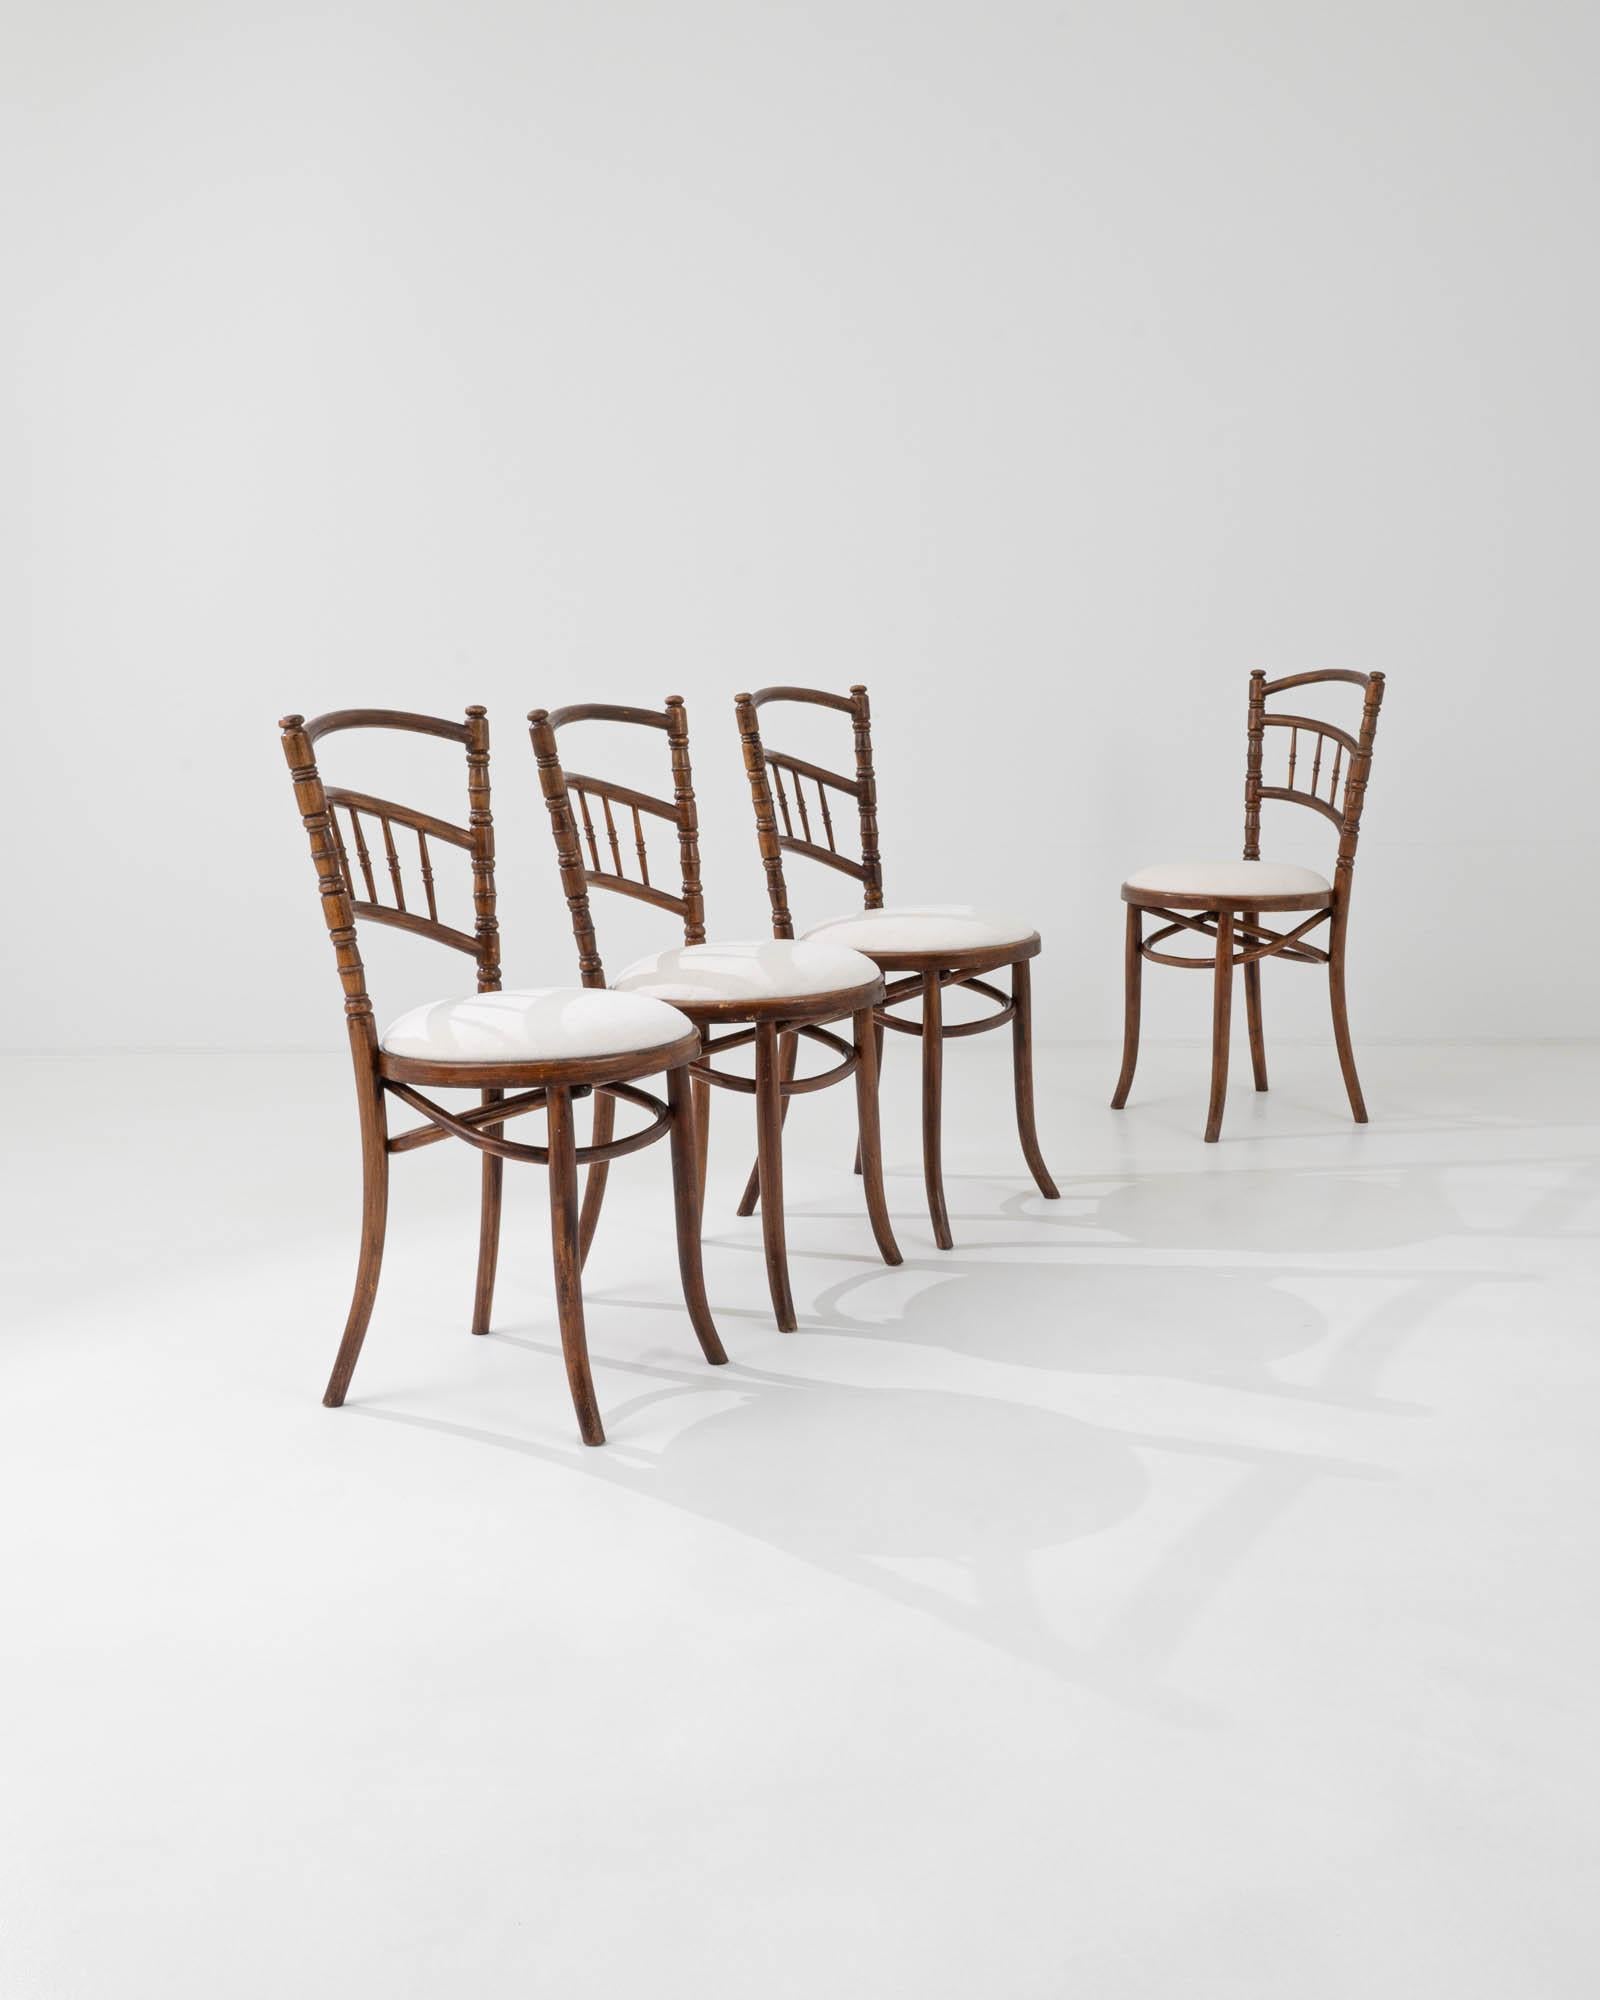 Made in France at the beginning of the 20th century, this set of four classic bistro chairs bear an undeniable resemblance to the early Thonet bentwood chairs that paved the way for the ‘boulangerie’ style, and for mass produced furniture as a